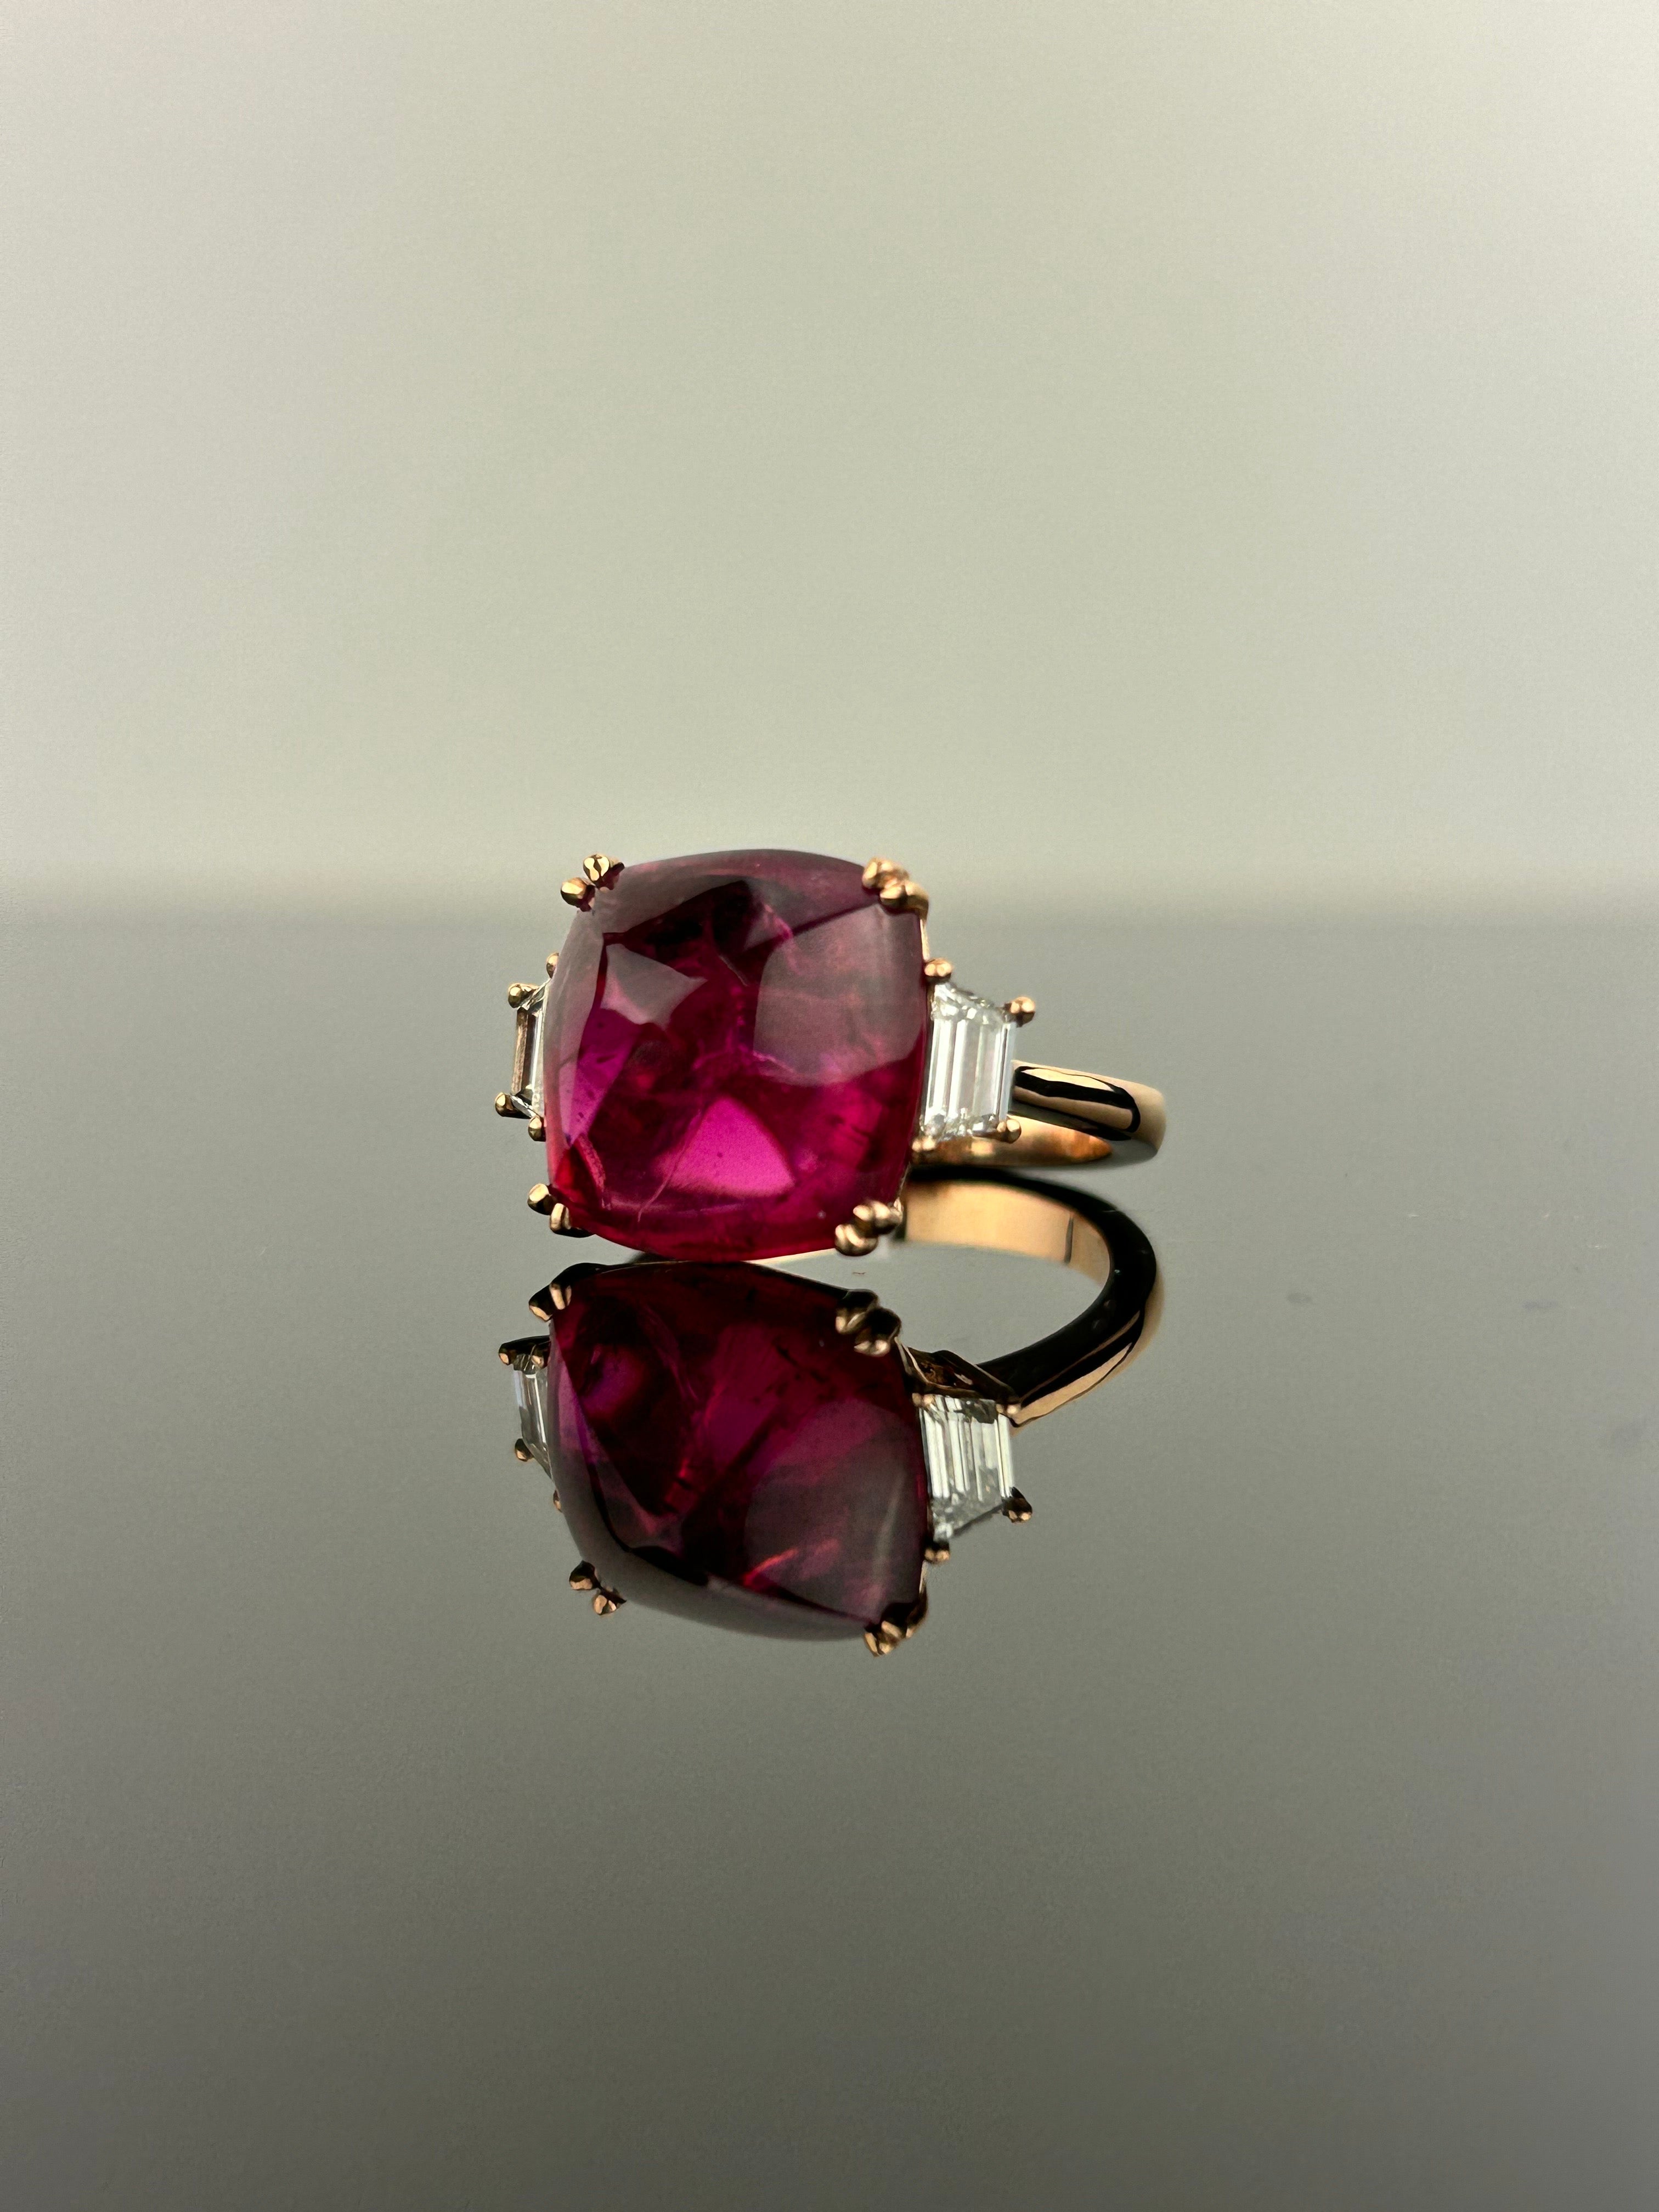 A stunning three stone engagement ring, with a 9.13 carat transparent natural Pink Tourmaline centre stone and 0.50 carat trapeze side stone VS2 quality Diamonds. The Tourmaline is of great lustre and has an ideal pink color. All set in 18K rose